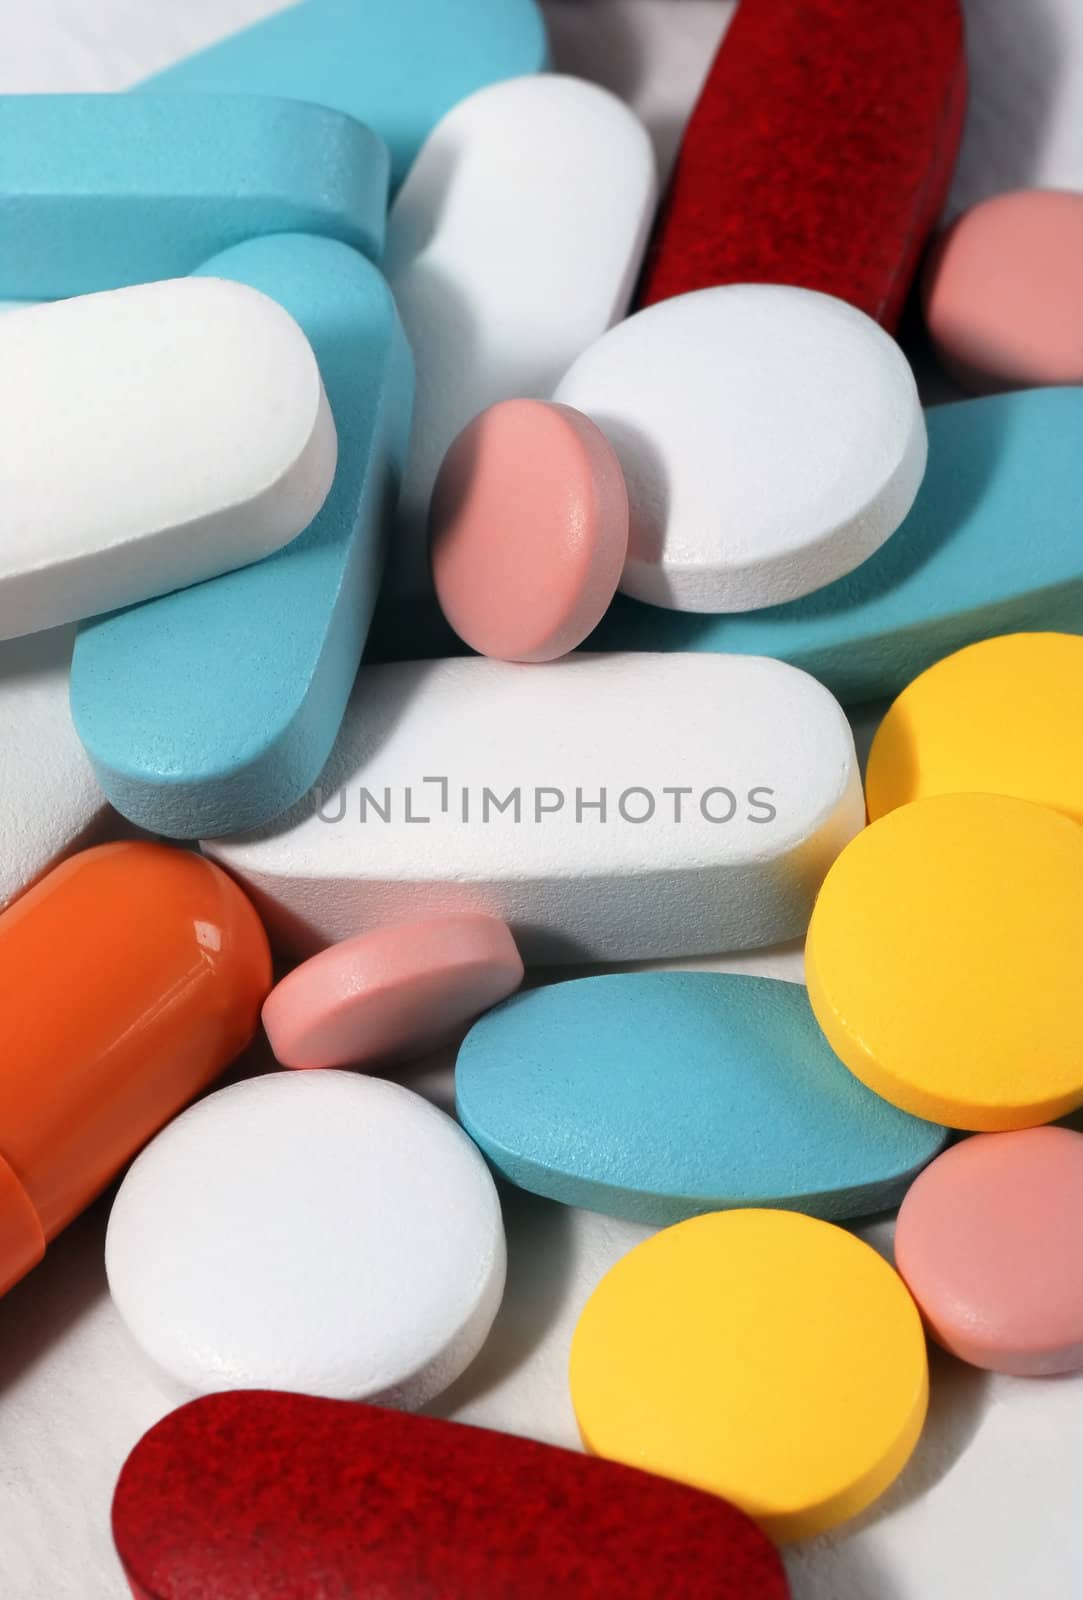 Tablets and color pills for different diseases.